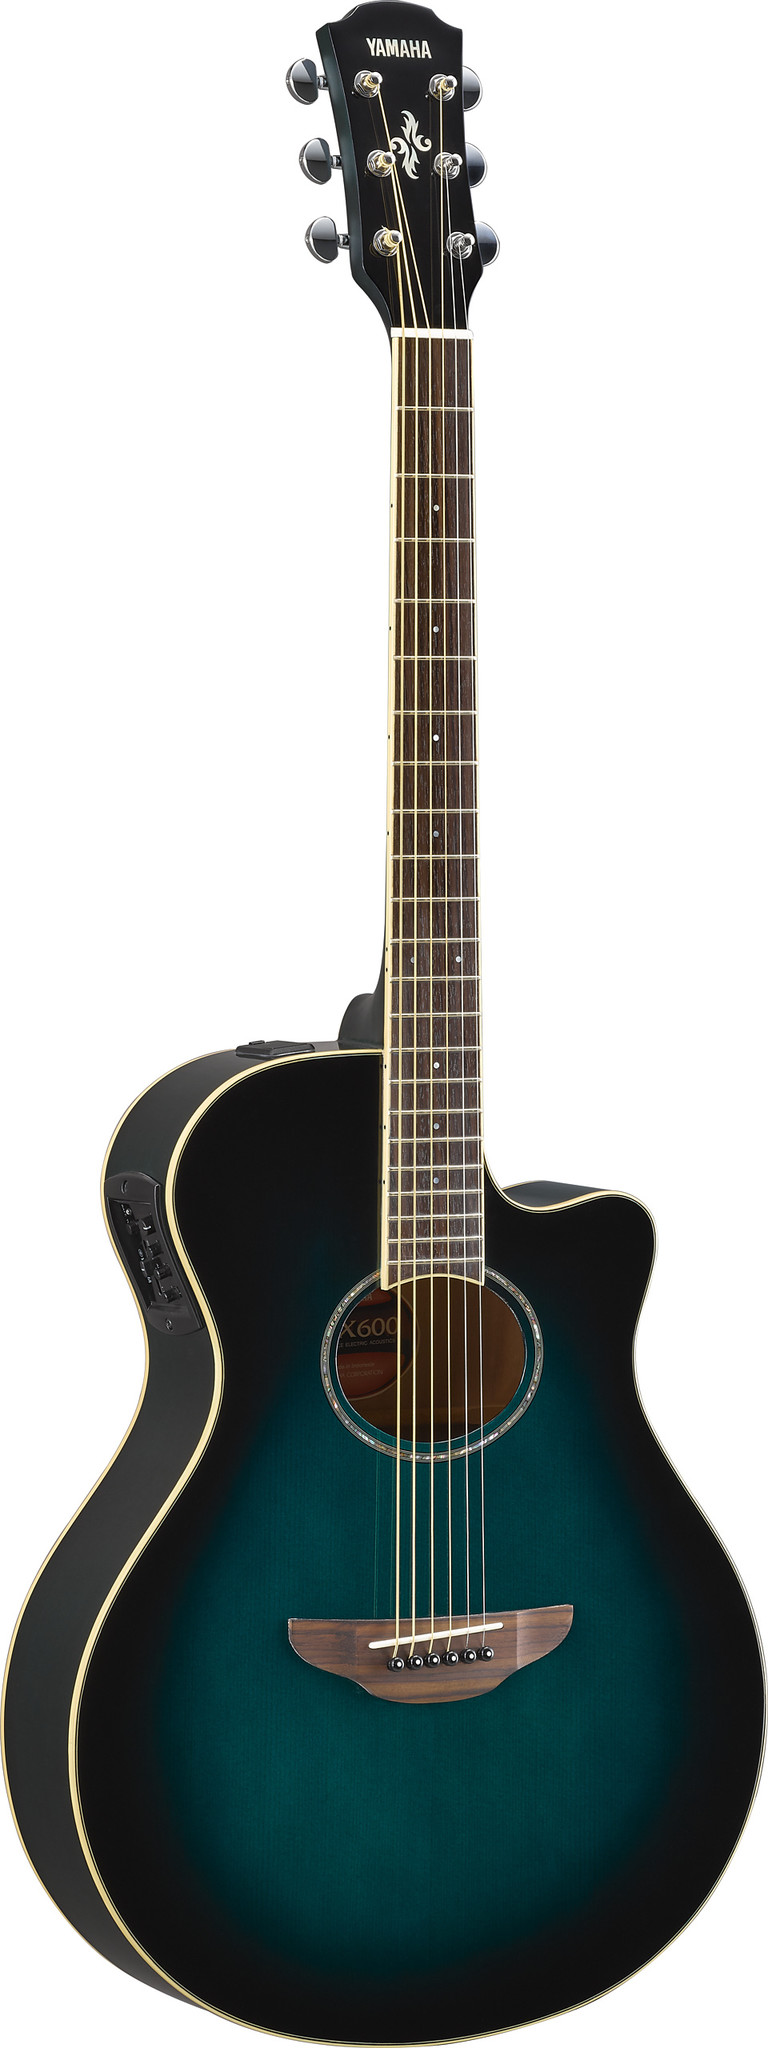 Yamaha APX600 Thinline Acoustic Electric Guitar Black - Town